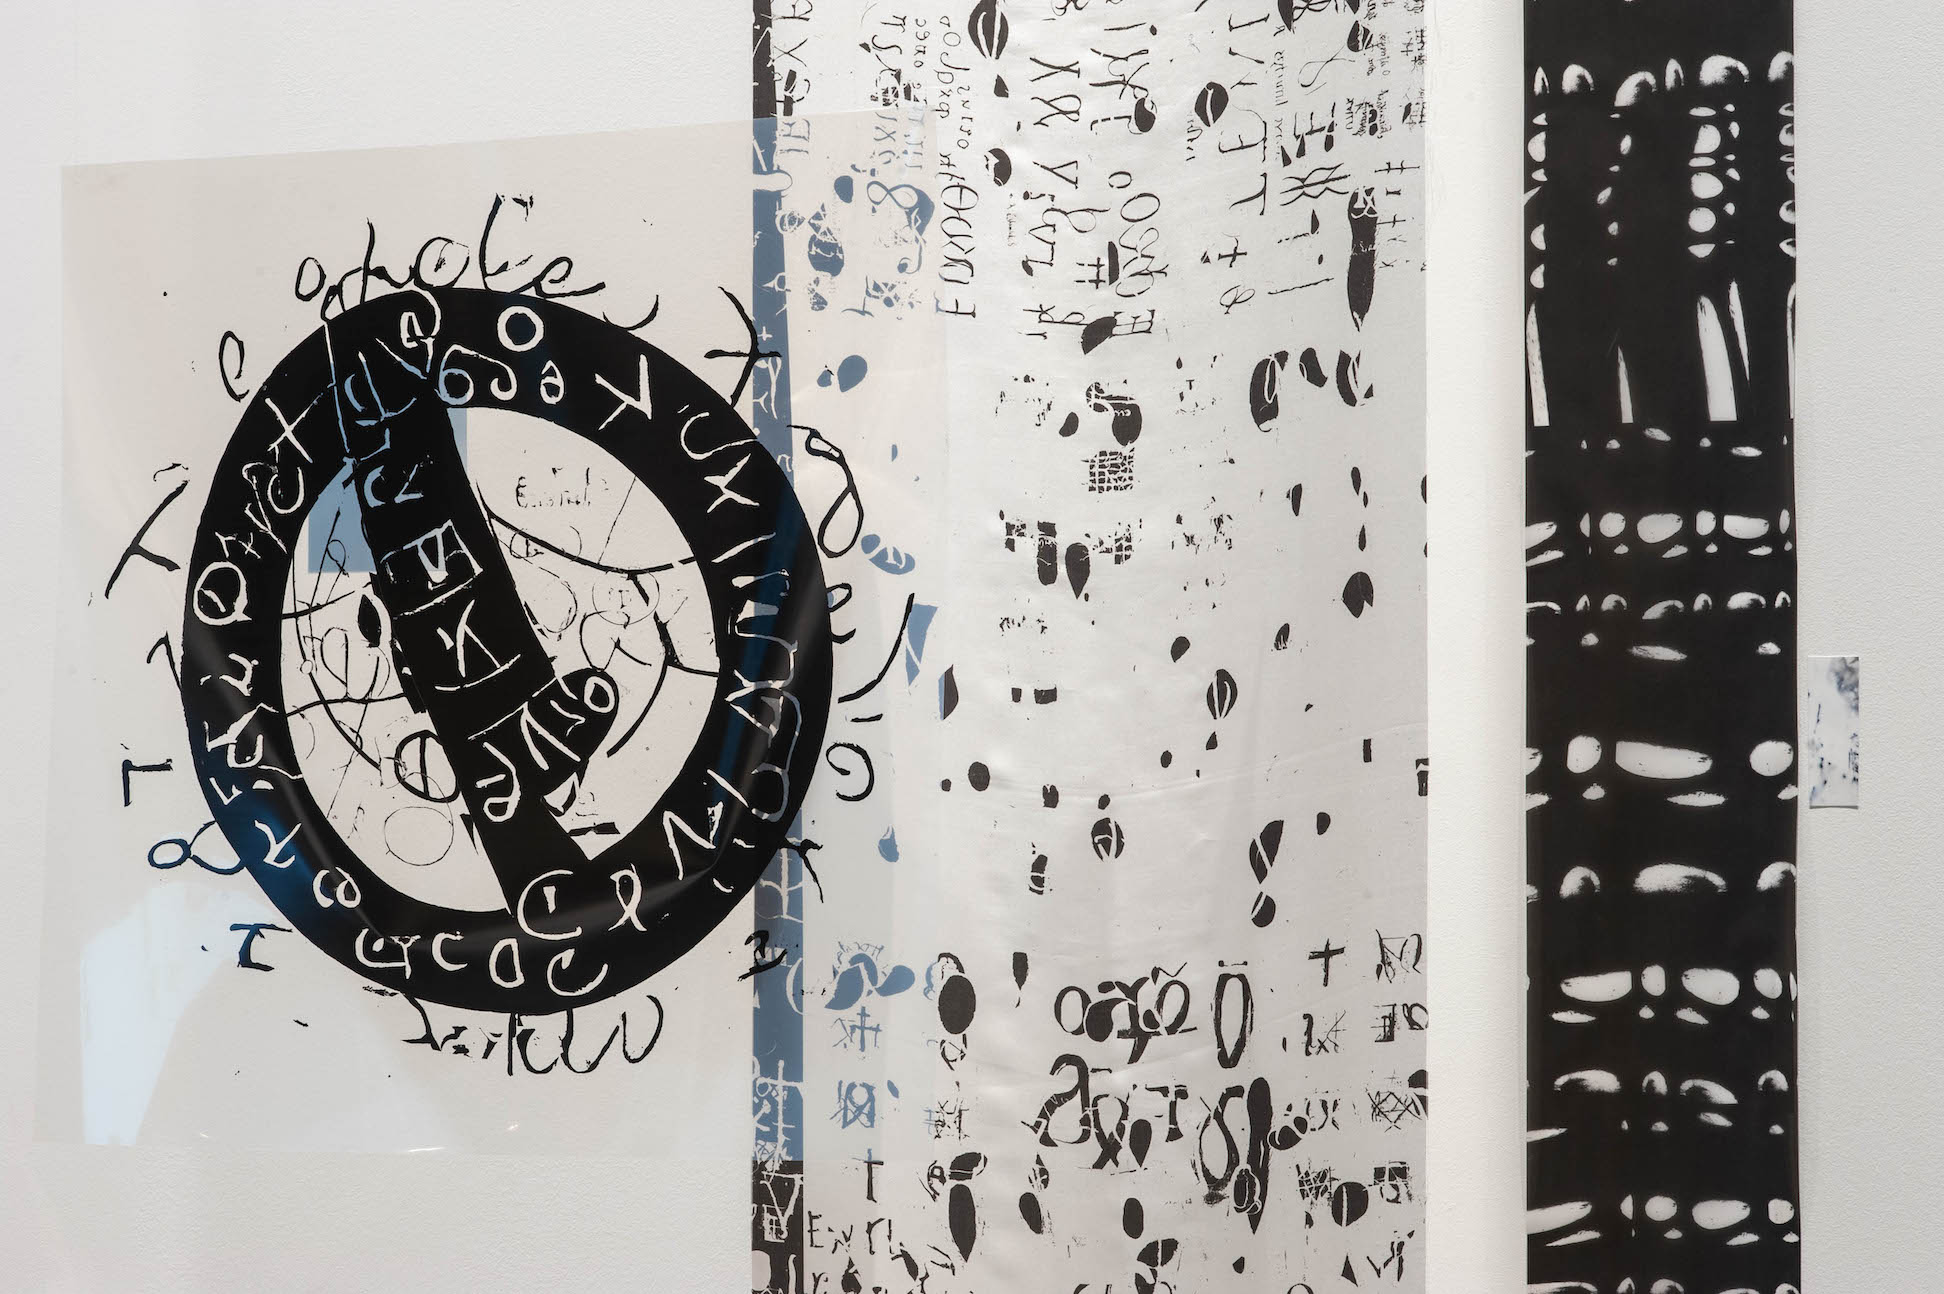 There are two vertical black and white artworks with small different black shapes and letters in different languages. On the left, there is a bold black circle with similar symbols in white.